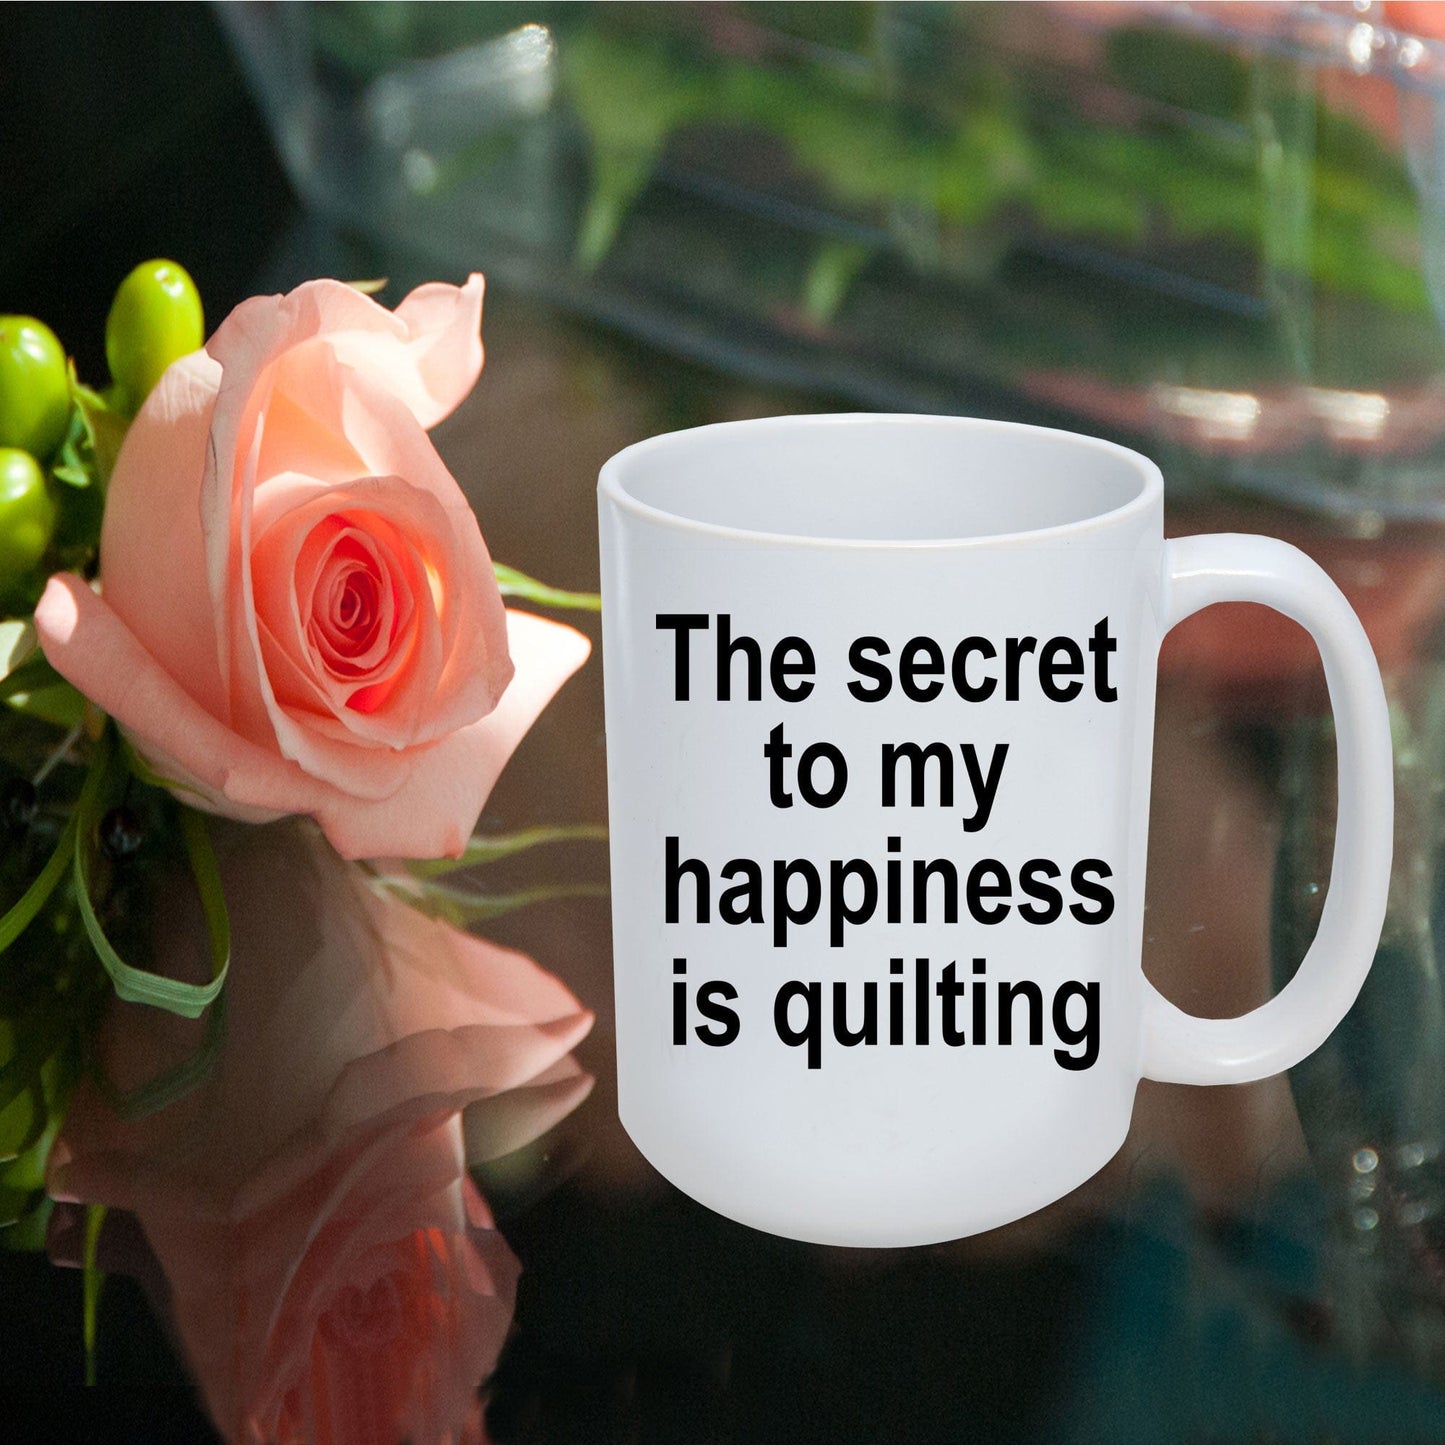 Quilter Coffee Mug - The secret to my happiness is quilting